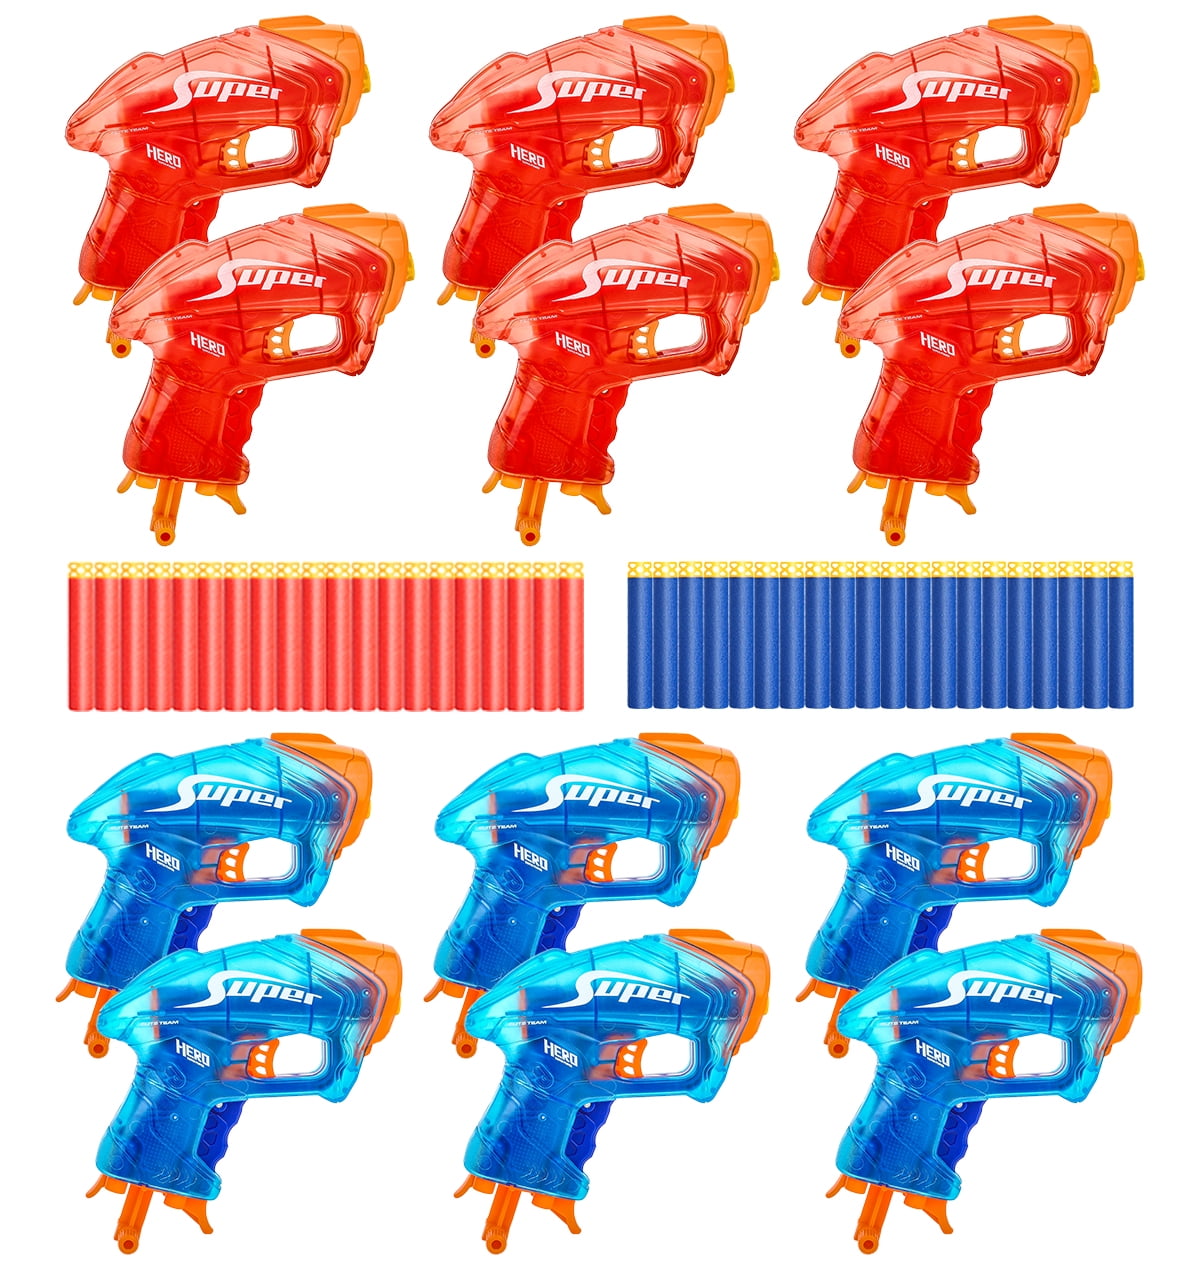 12 Small Gun Set for Nerf Party Supplies and Suitable for Birthday Bulk Nerf War Party Pack Bundle, Equipped with 12 Mini Pistol Blaster and 40 Foam Darts - for